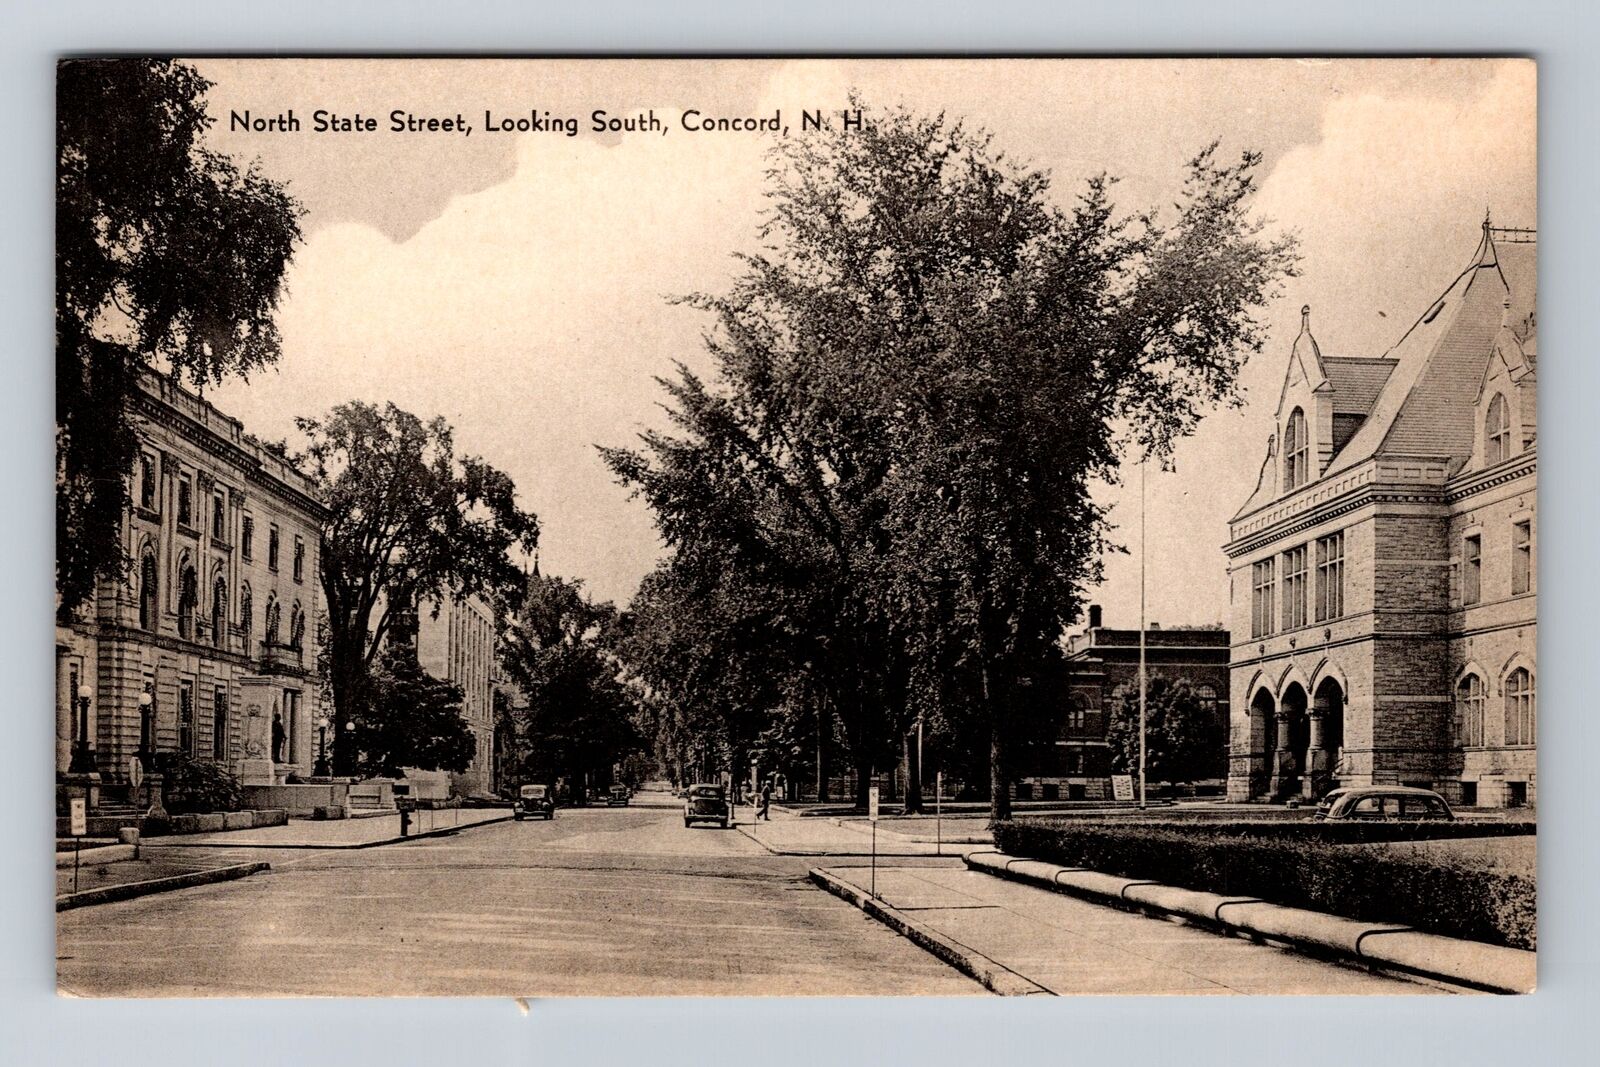 Concord NH-New Hampshire, North State Street, Advertising, Vintage Postcard